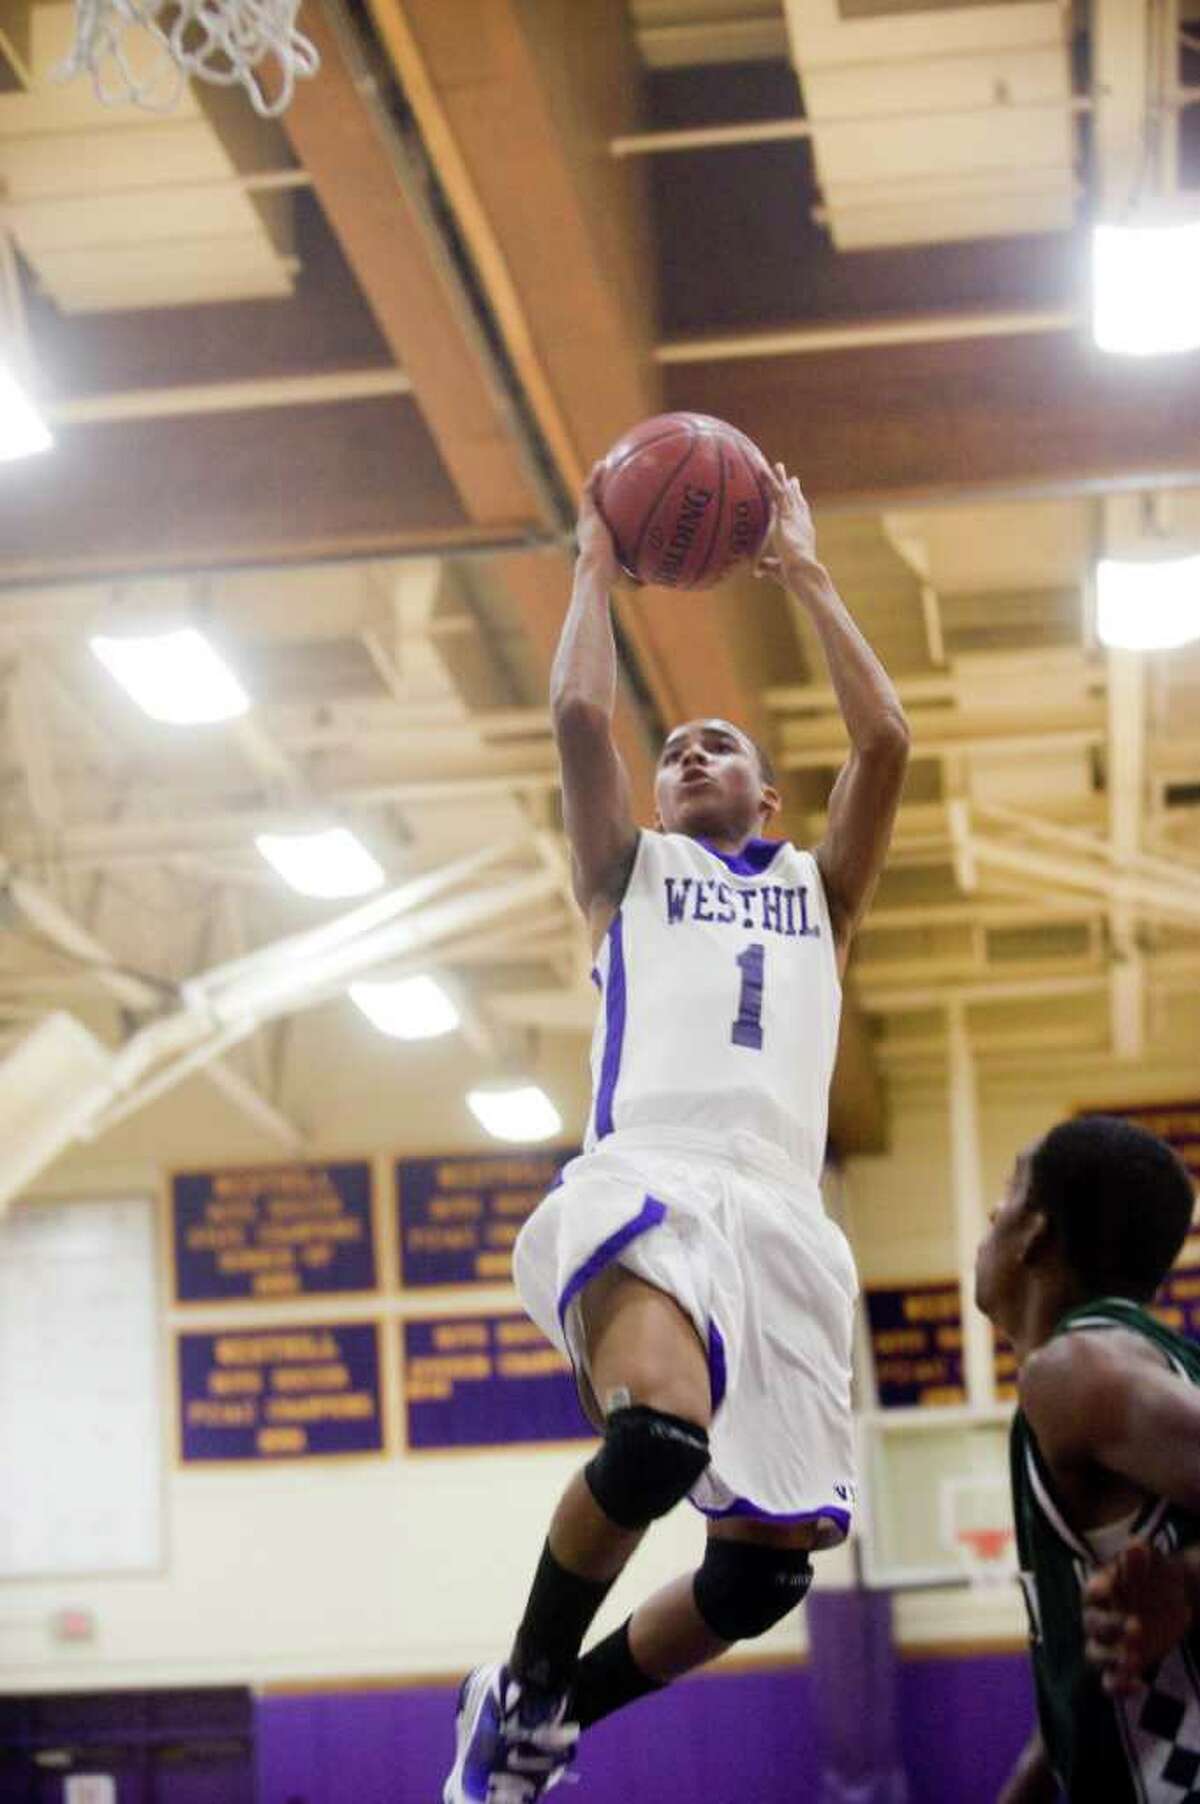 Westhill's Tony Dobbinson in action as Westhill High School hosts Norwalk High in a boys basketball game Wednesday, December 15, 2010.